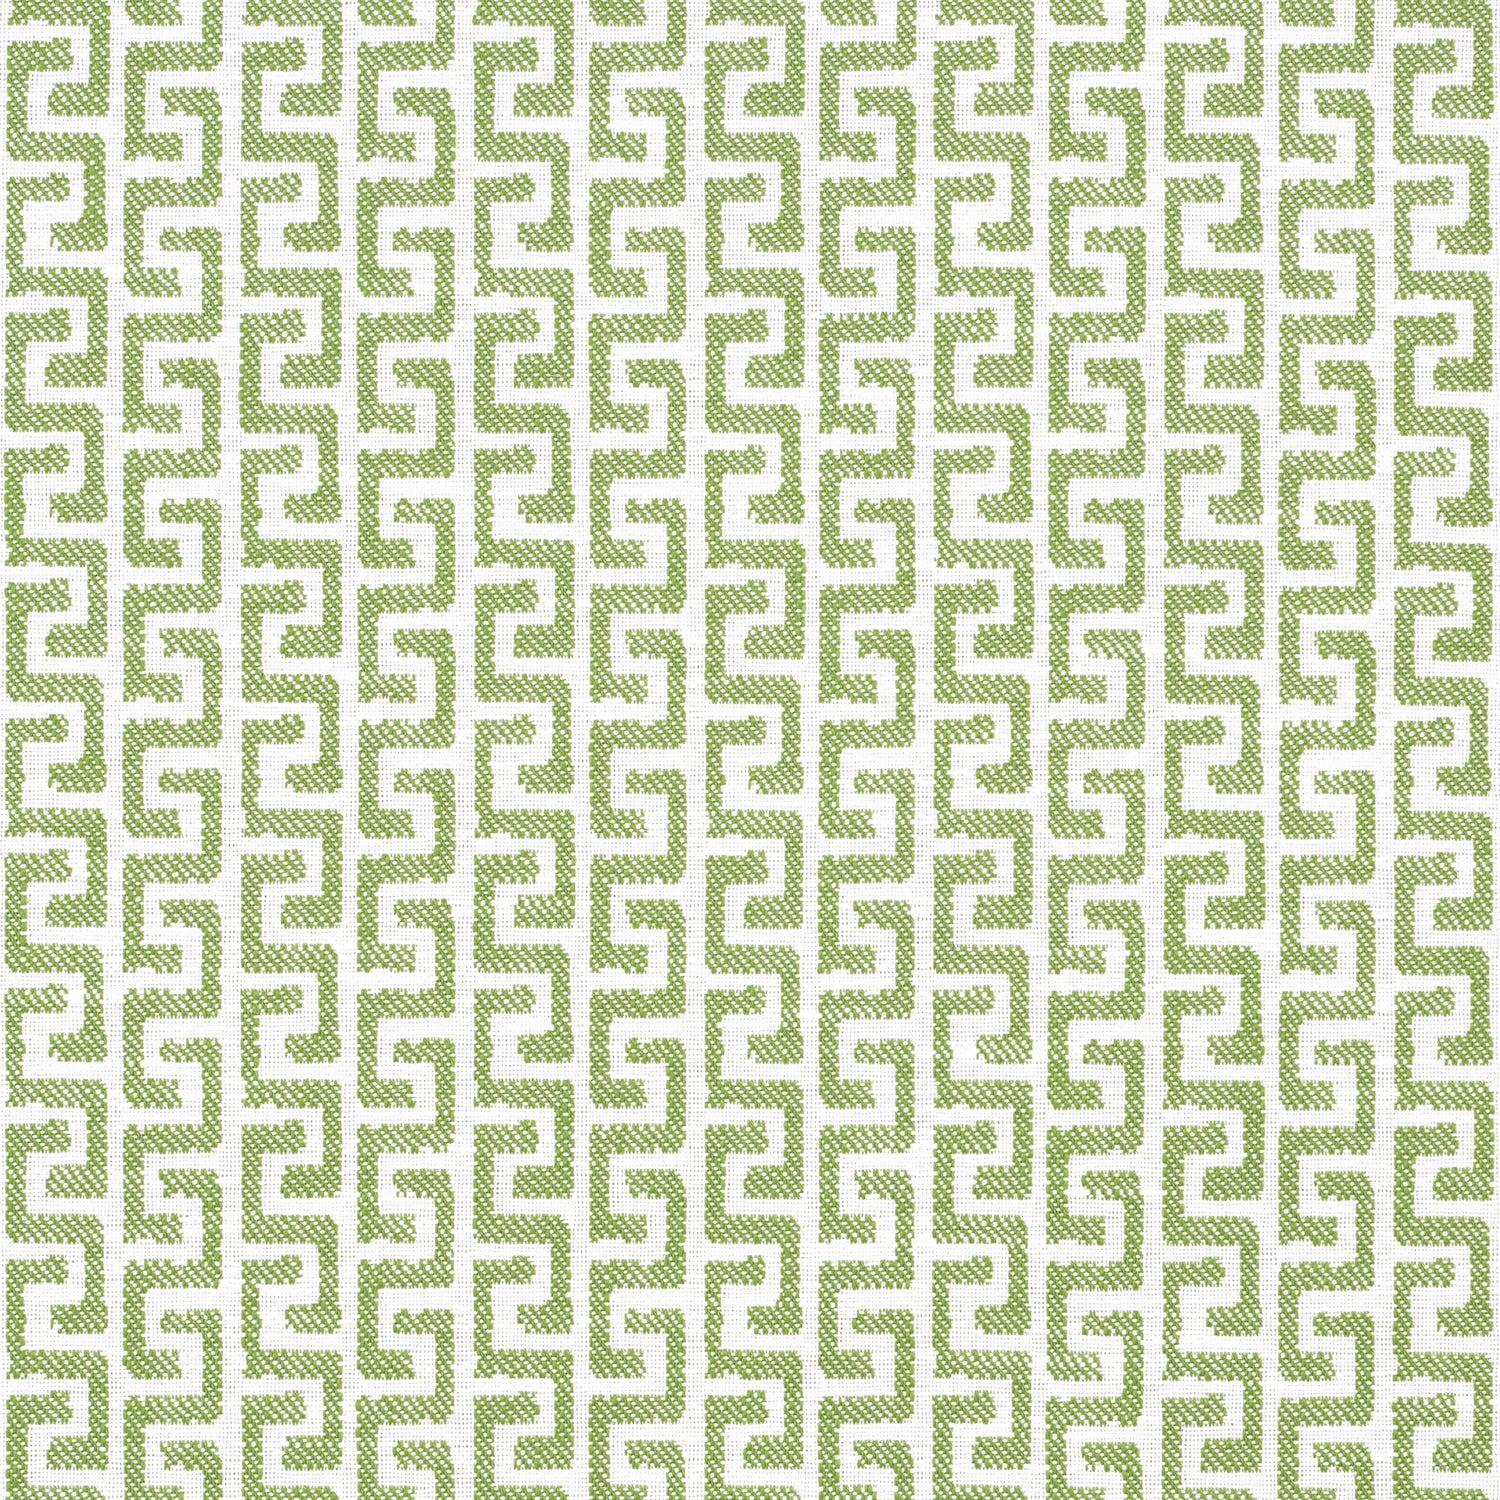 Merritt fabric in spring color - pattern number W74254 - by Thibaut in the Passage collection